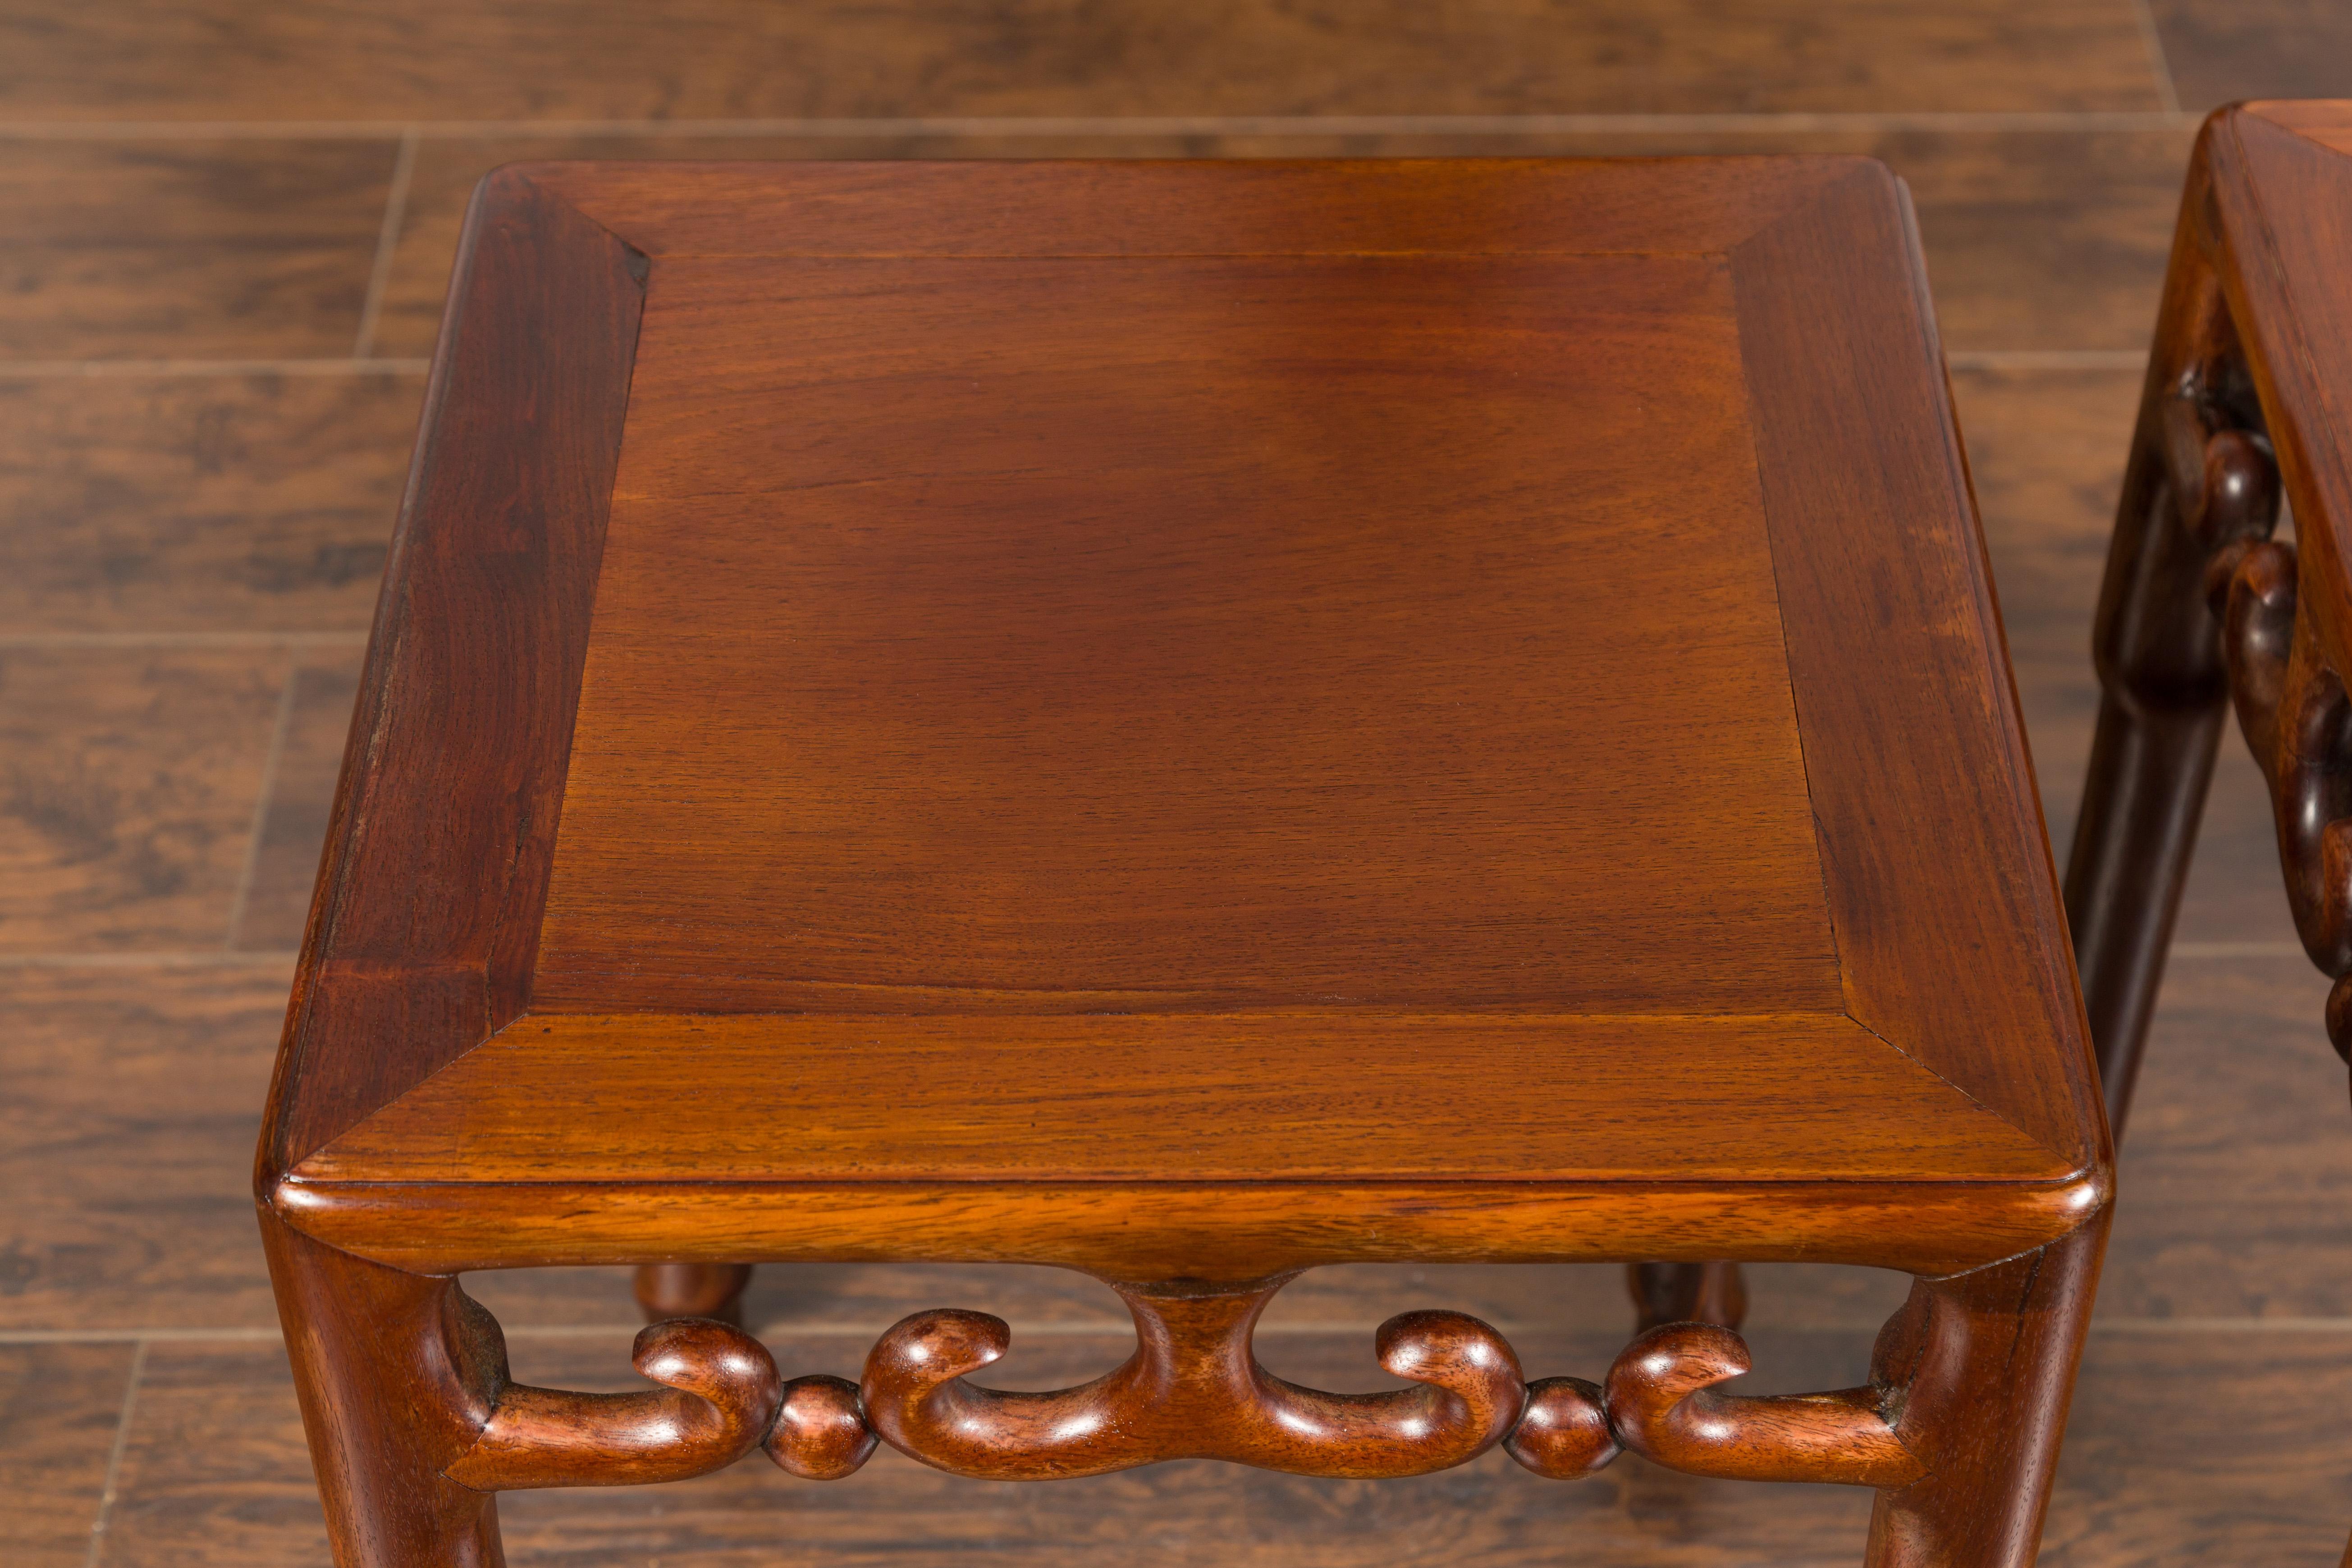 Pair of Asian Midcentury Mahogany Side Tables with Scrolling Fretwork Motifs For Sale 2